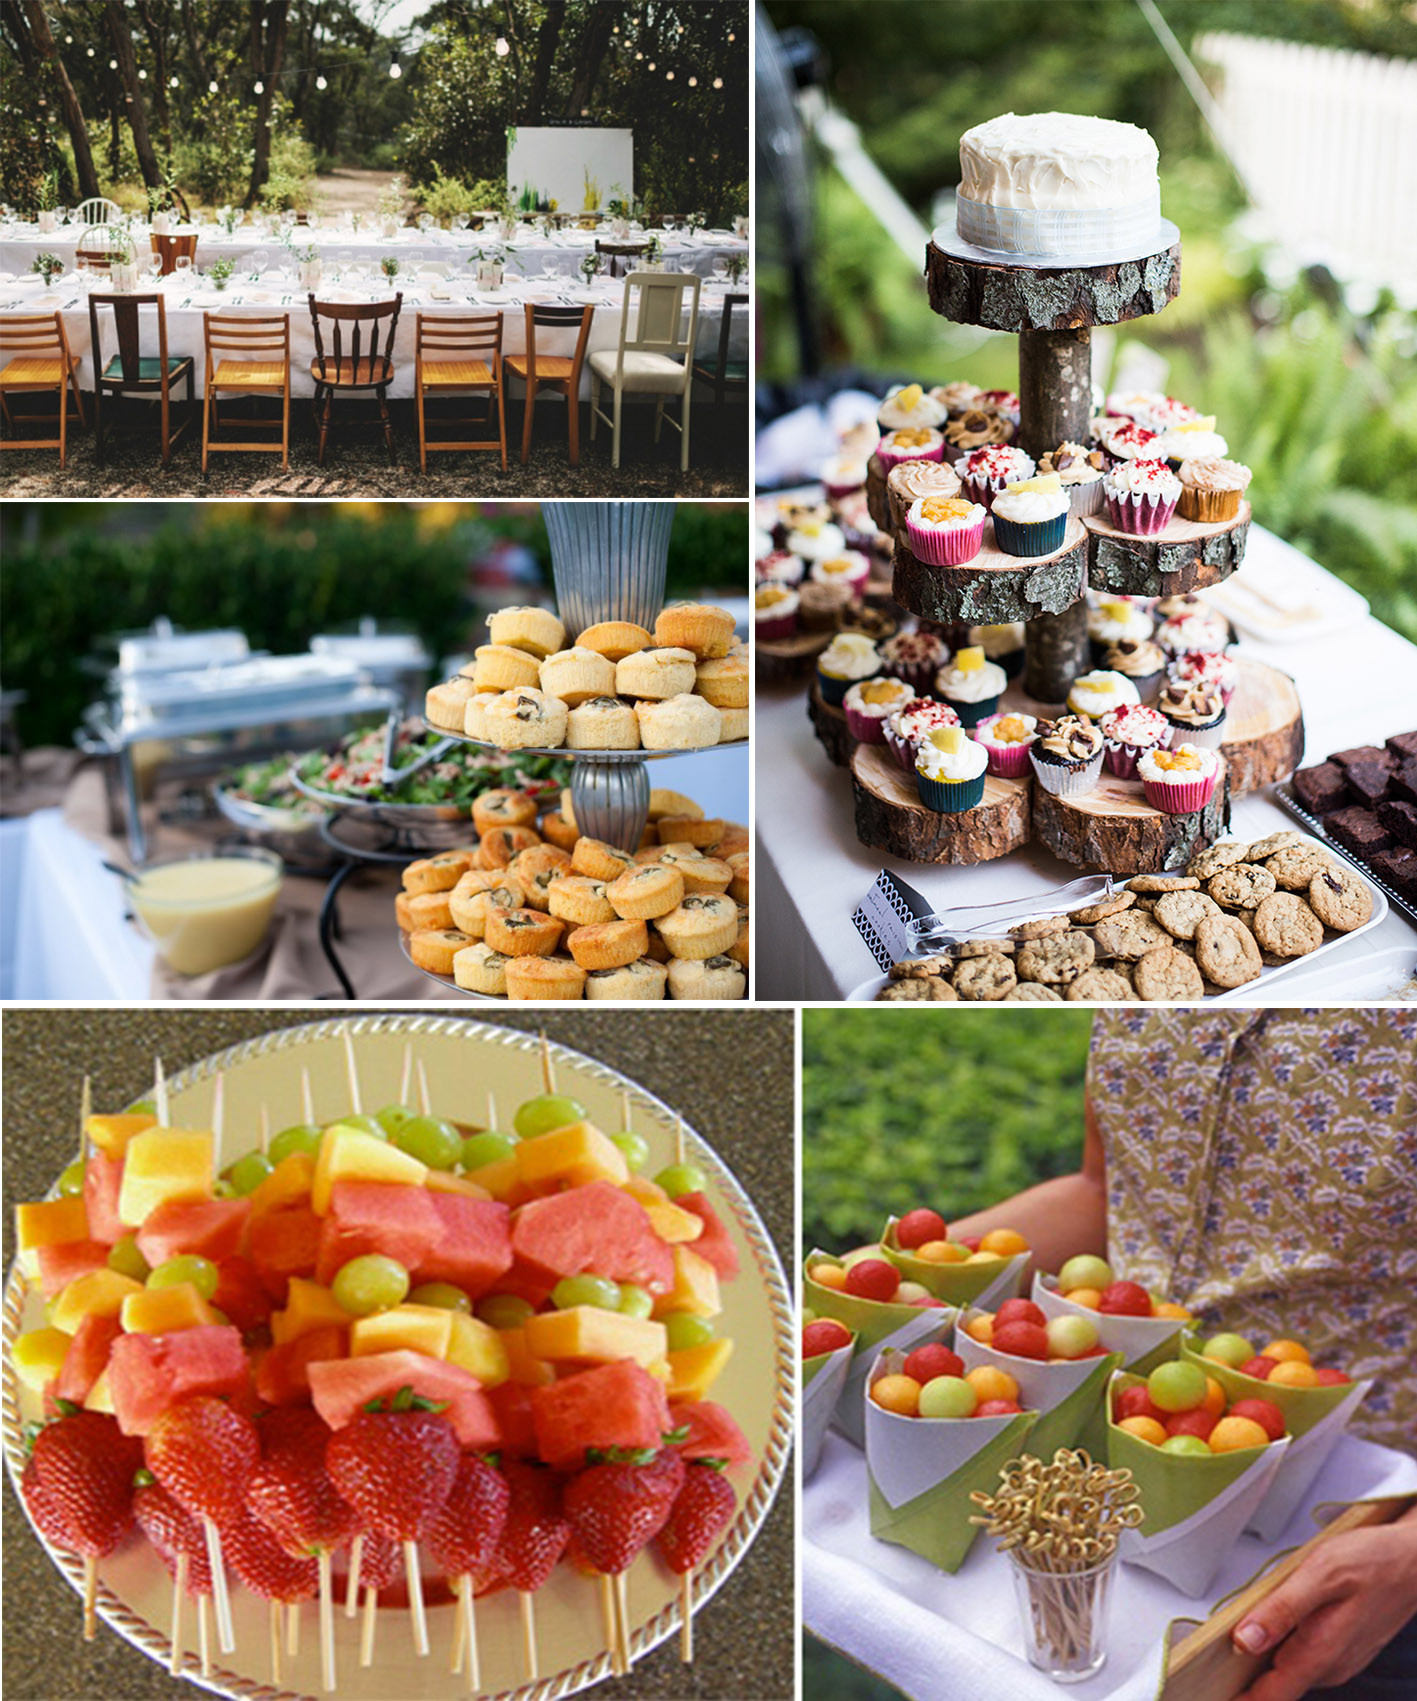 Engagement Party Food Ideas
 How to play a backyard themed wedding – lianggeyuan123